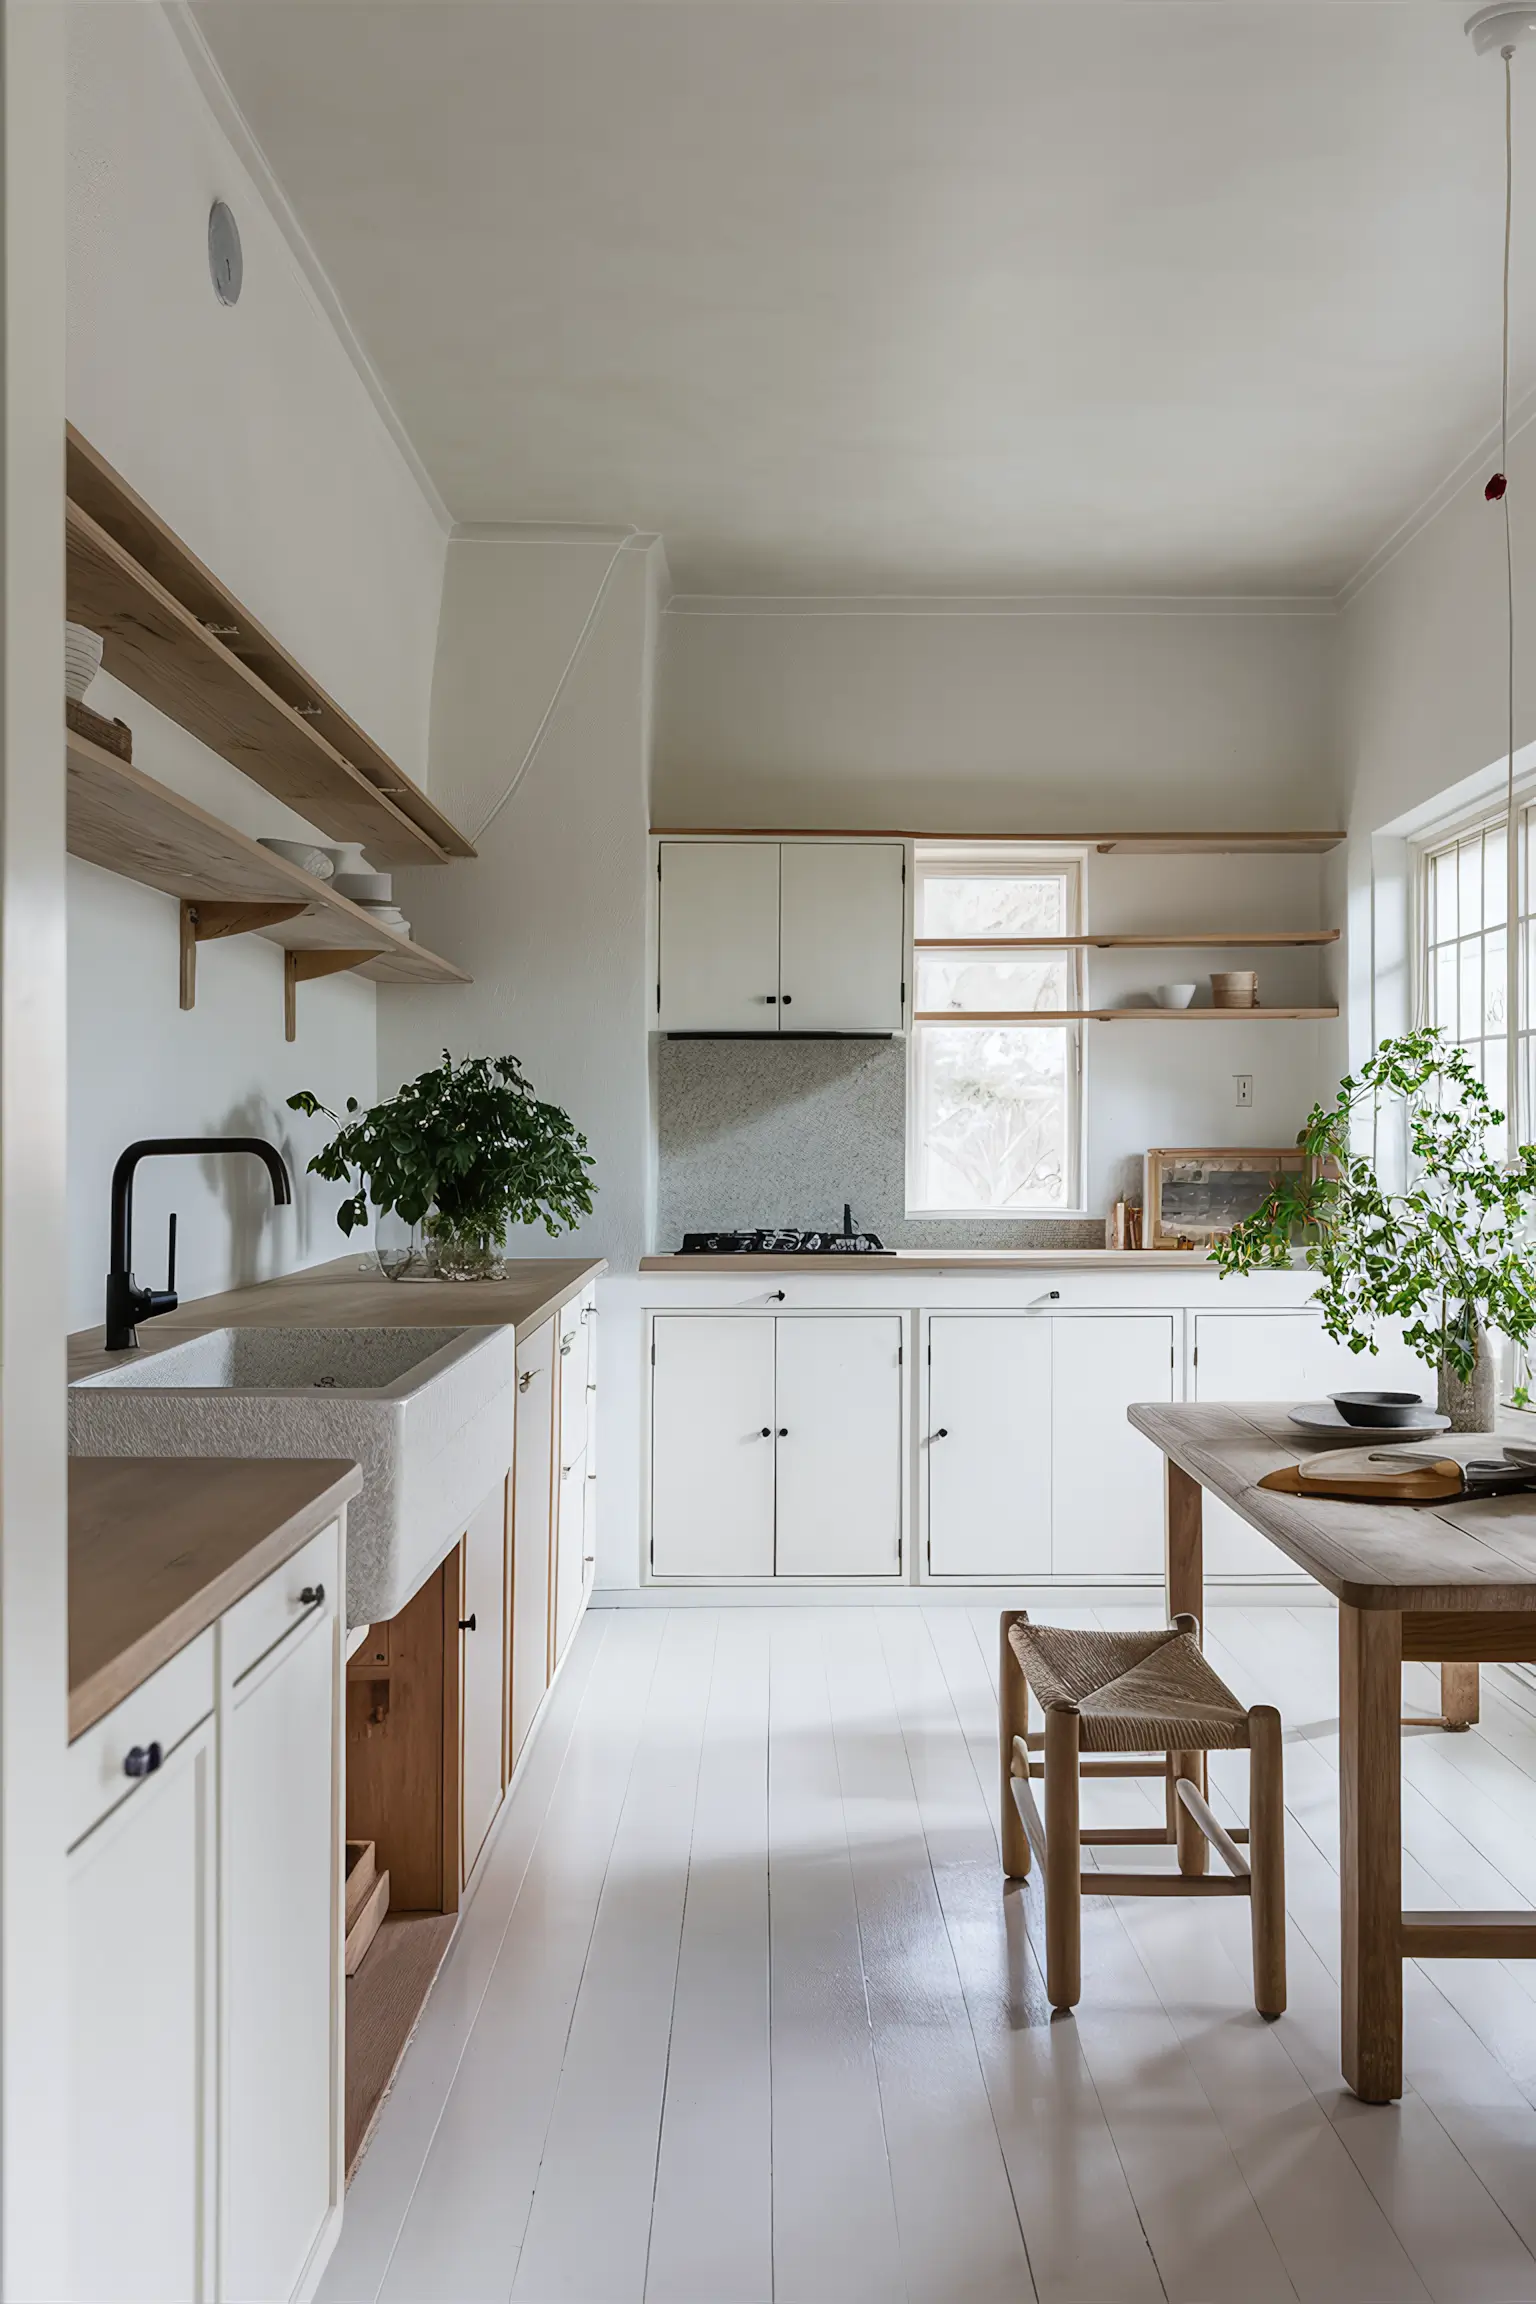 Minimalistic white kitchen with Japandi style and natural materials.